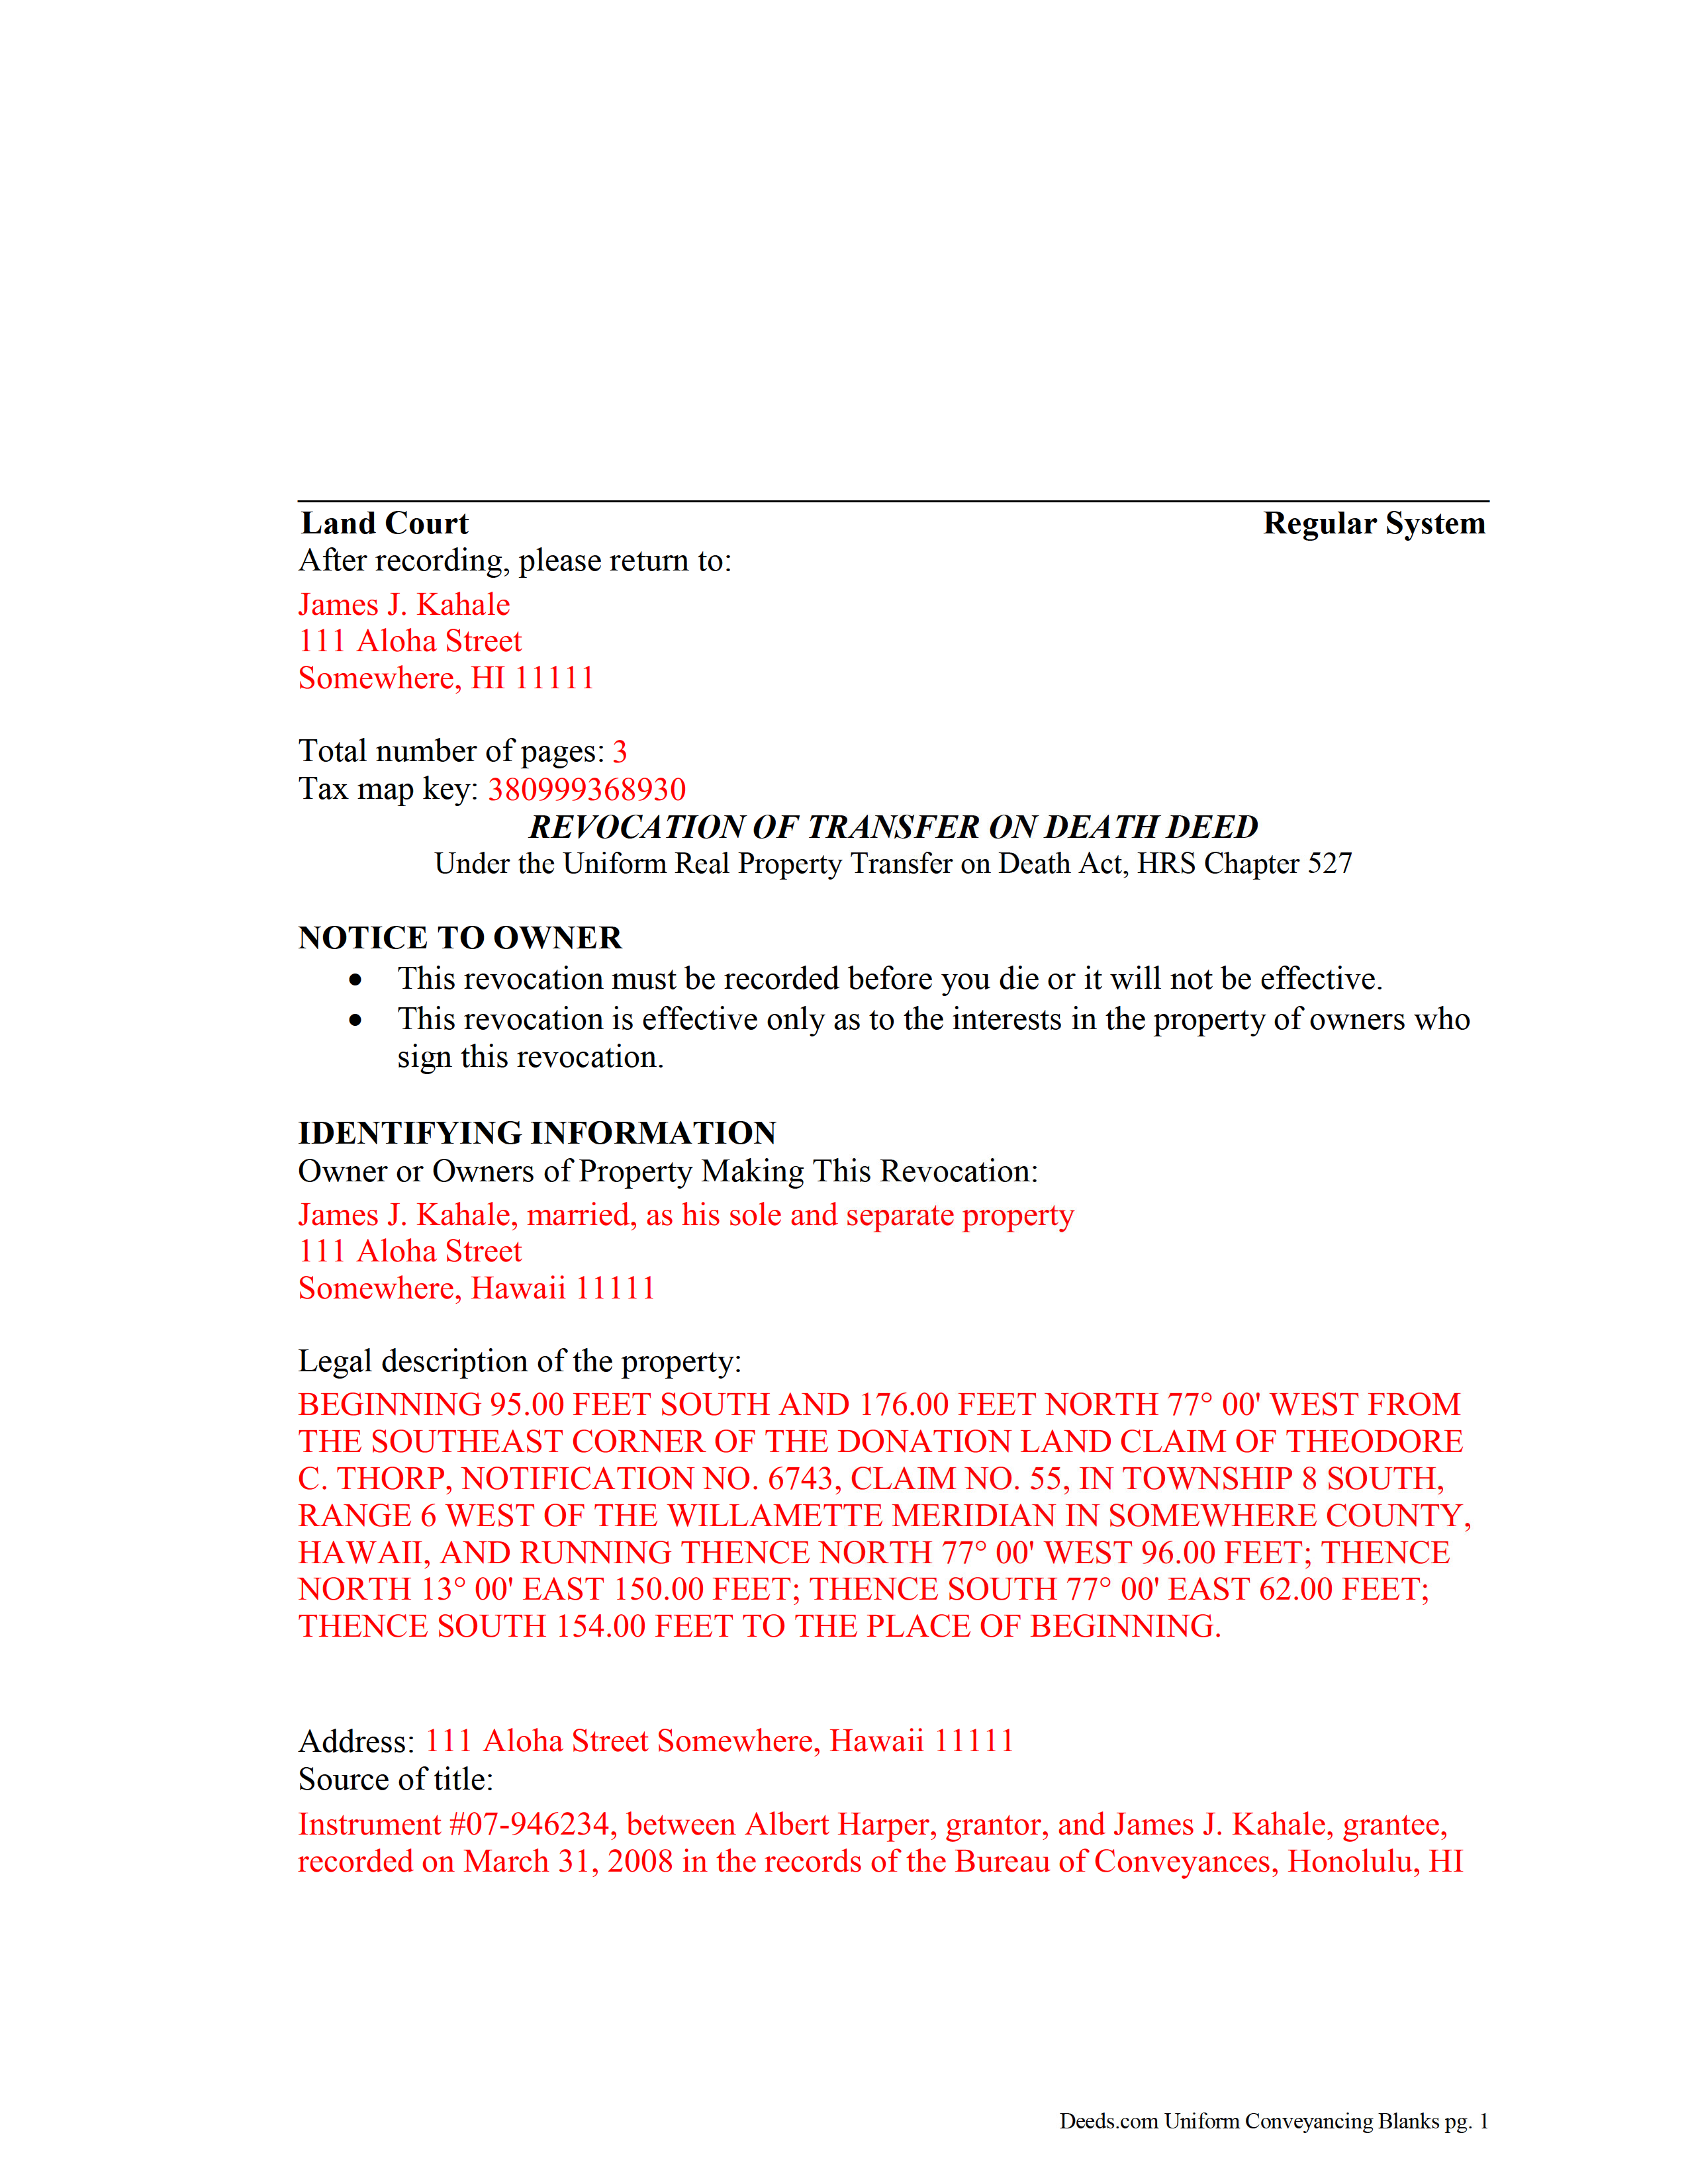 Completed Example of the Revocation of Transfer on Death Deed Document